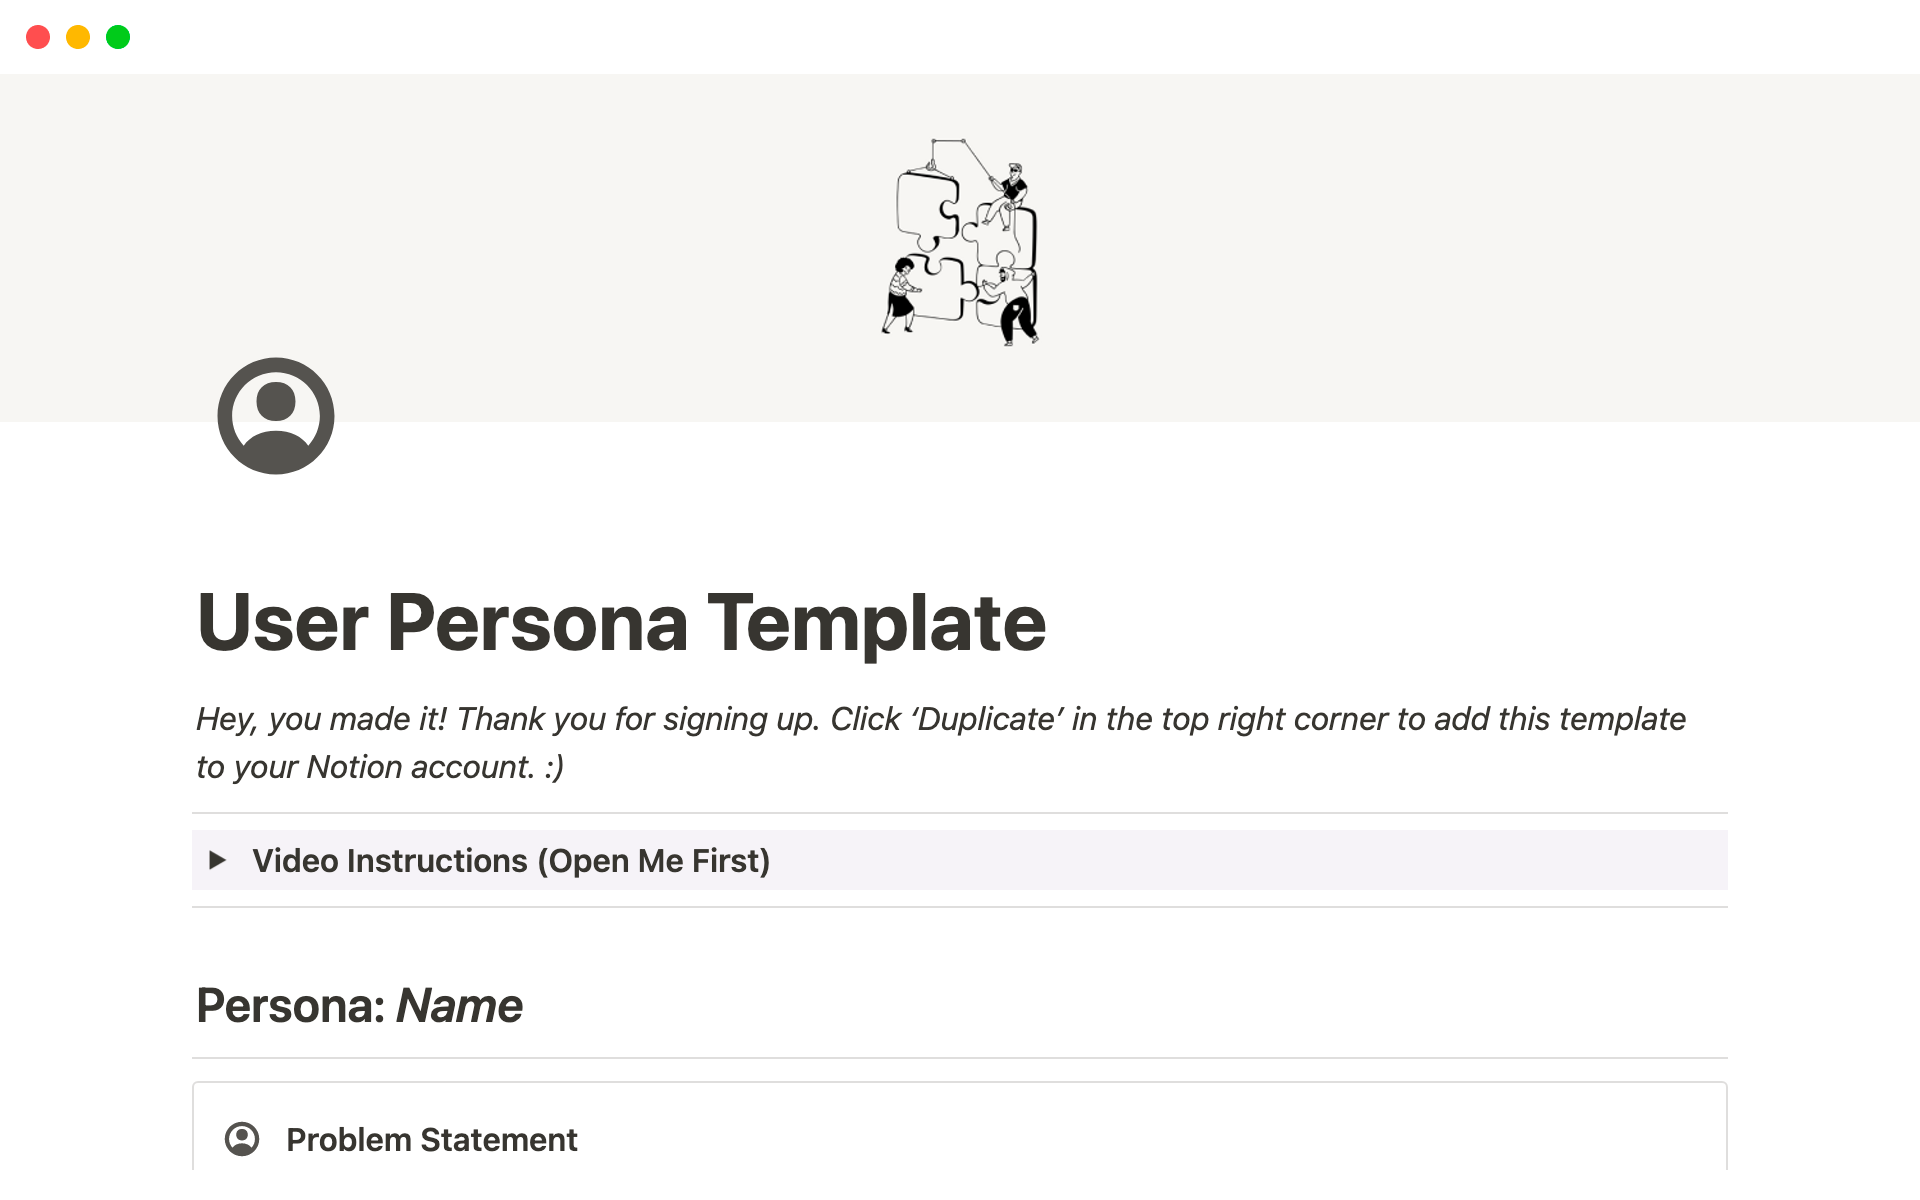 Identify and manage user personas with built-in prompts to guide you through the process.